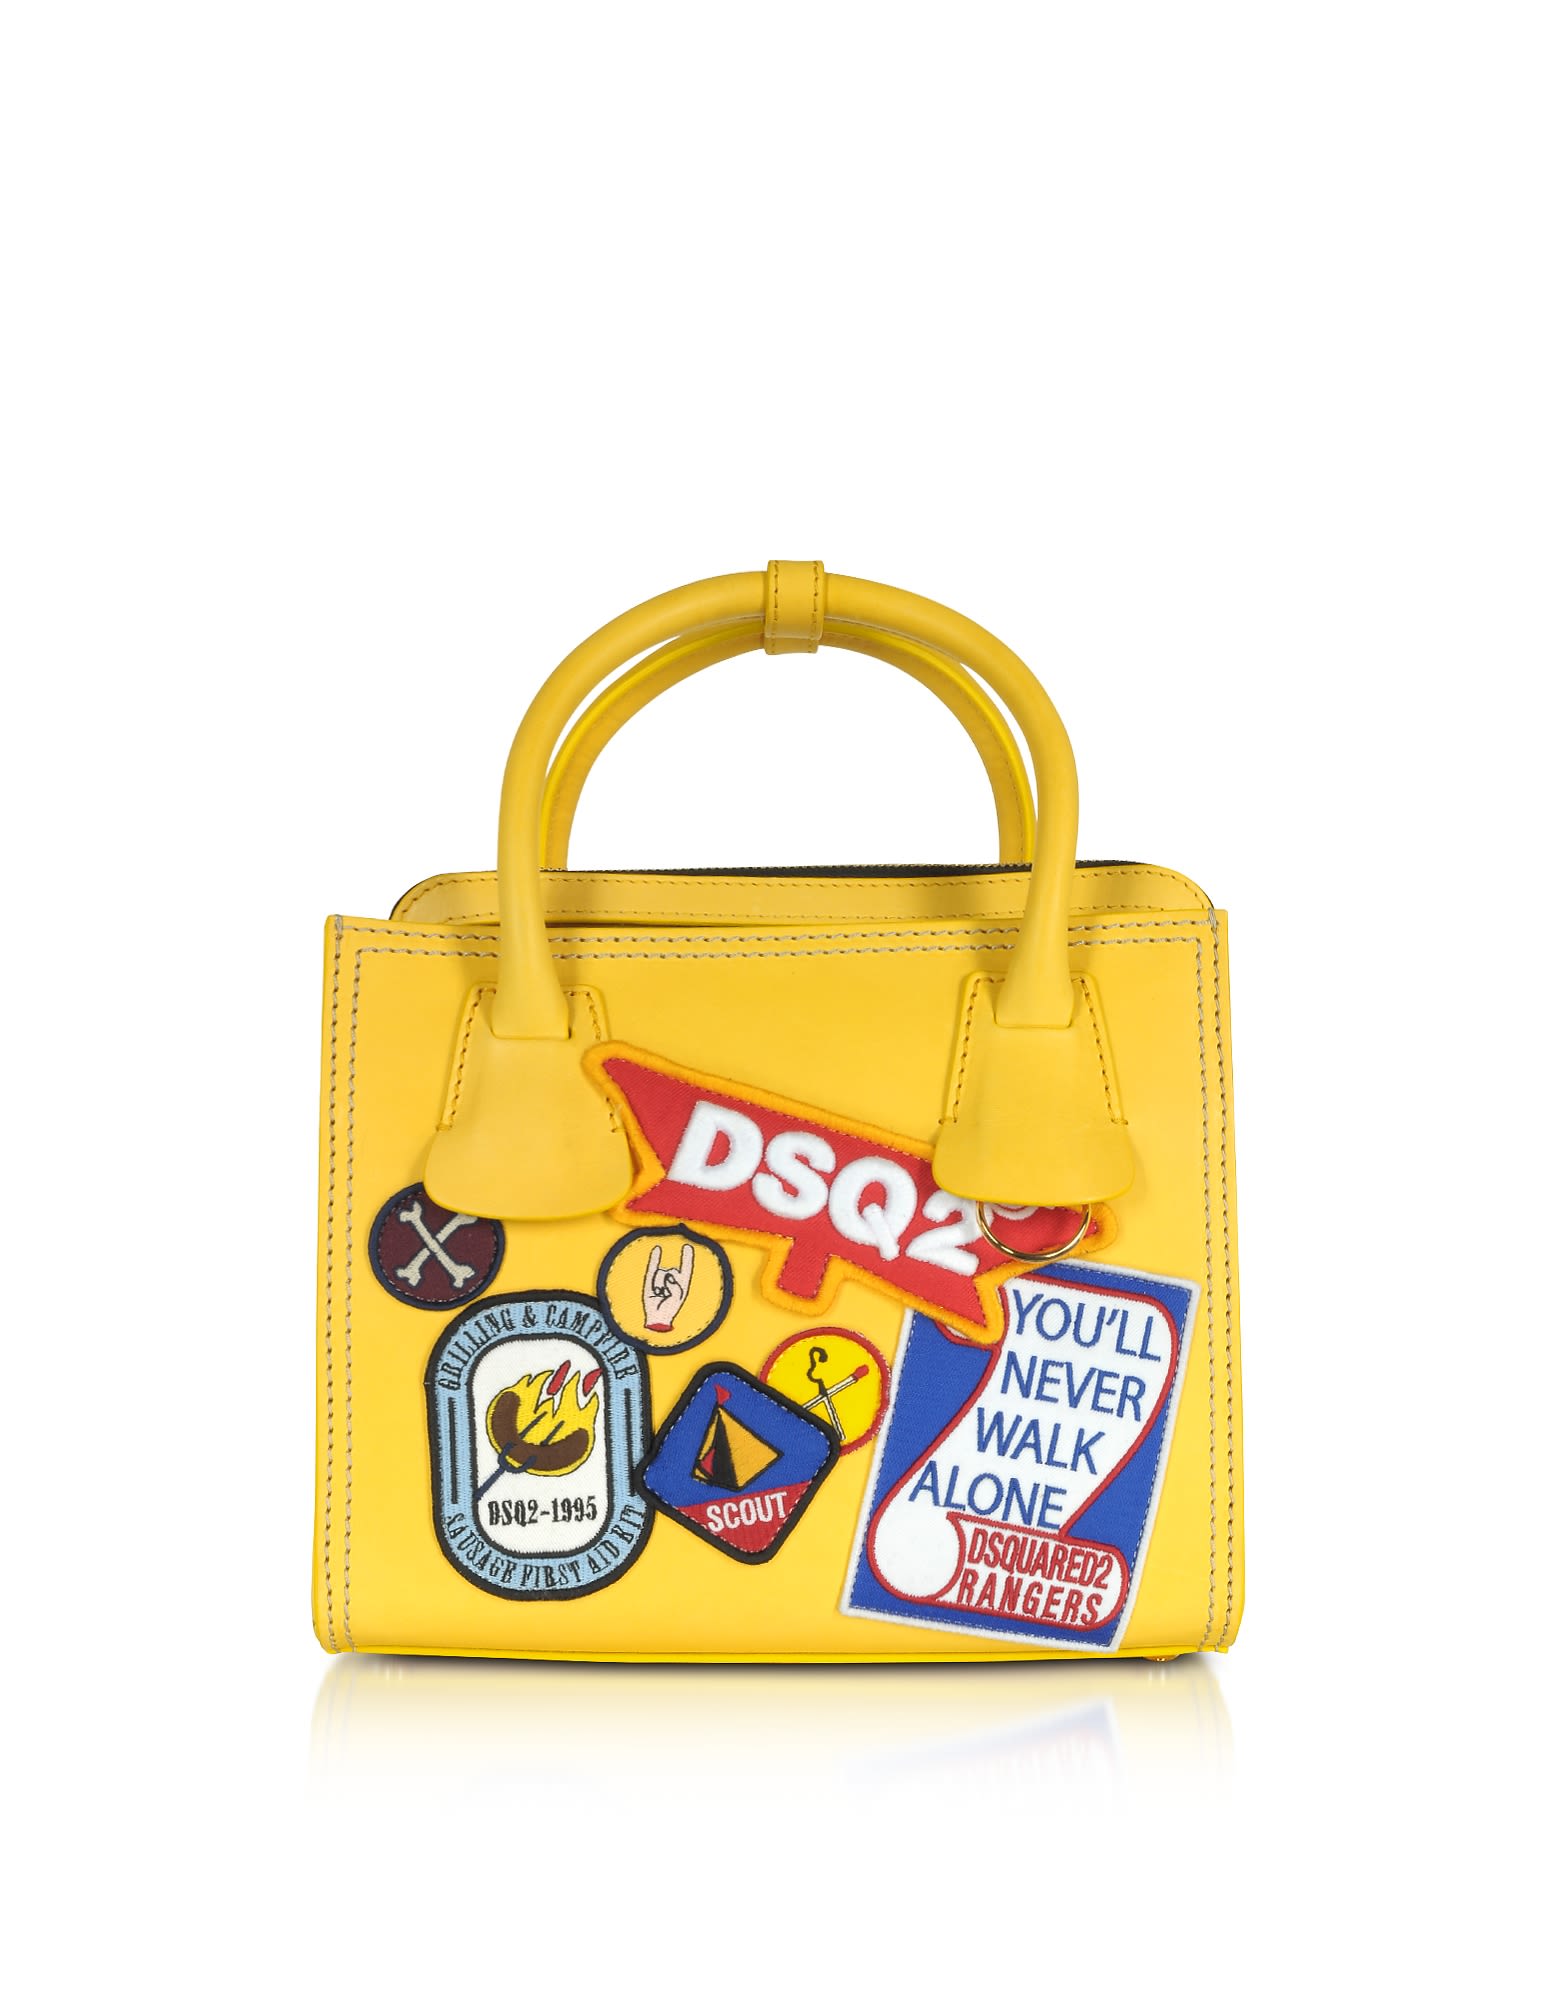 DSQUARED2 DEANA SMALL YELLOW LEATHER SATCHEL W-PATCHES,10597573